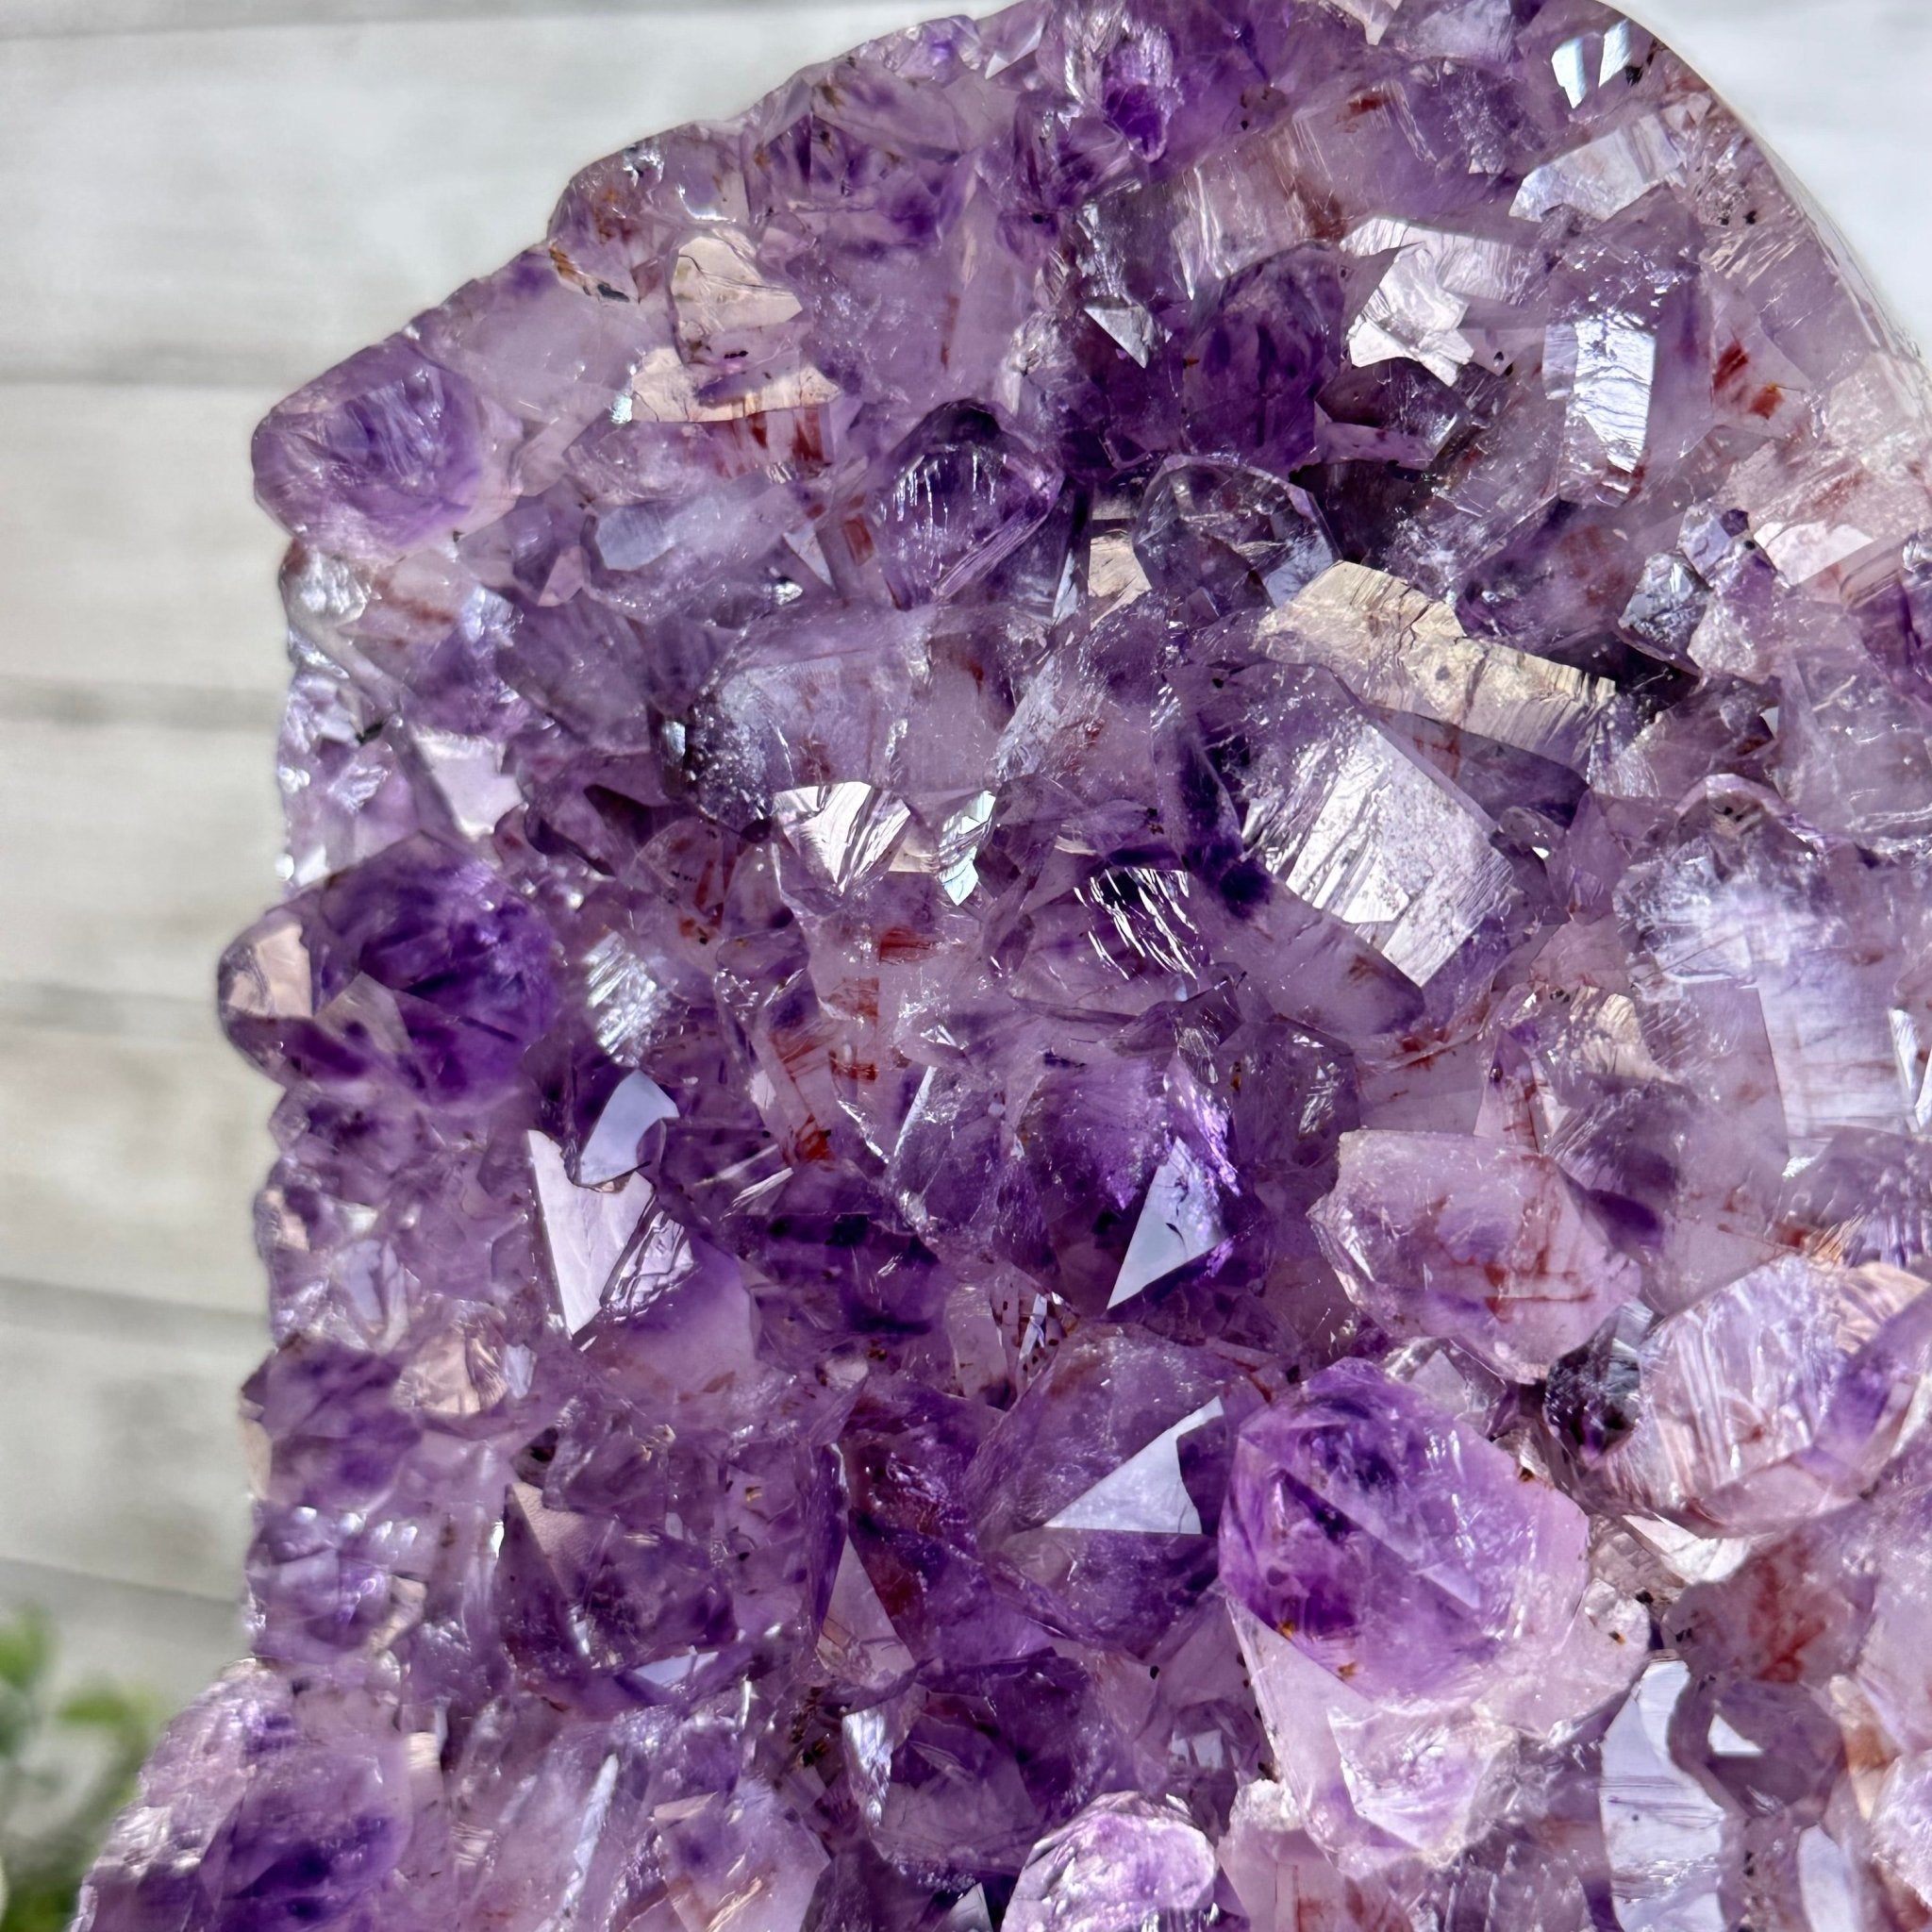 Extra Quality Amethyst Cluster on Cement Base, 12.8 lbs and 11.75" Tall #5614-0103 - Brazil GemsBrazil GemsExtra Quality Amethyst Cluster on Cement Base, 12.8 lbs and 11.75" Tall #5614-0103Clusters on Cement Bases5614-0103